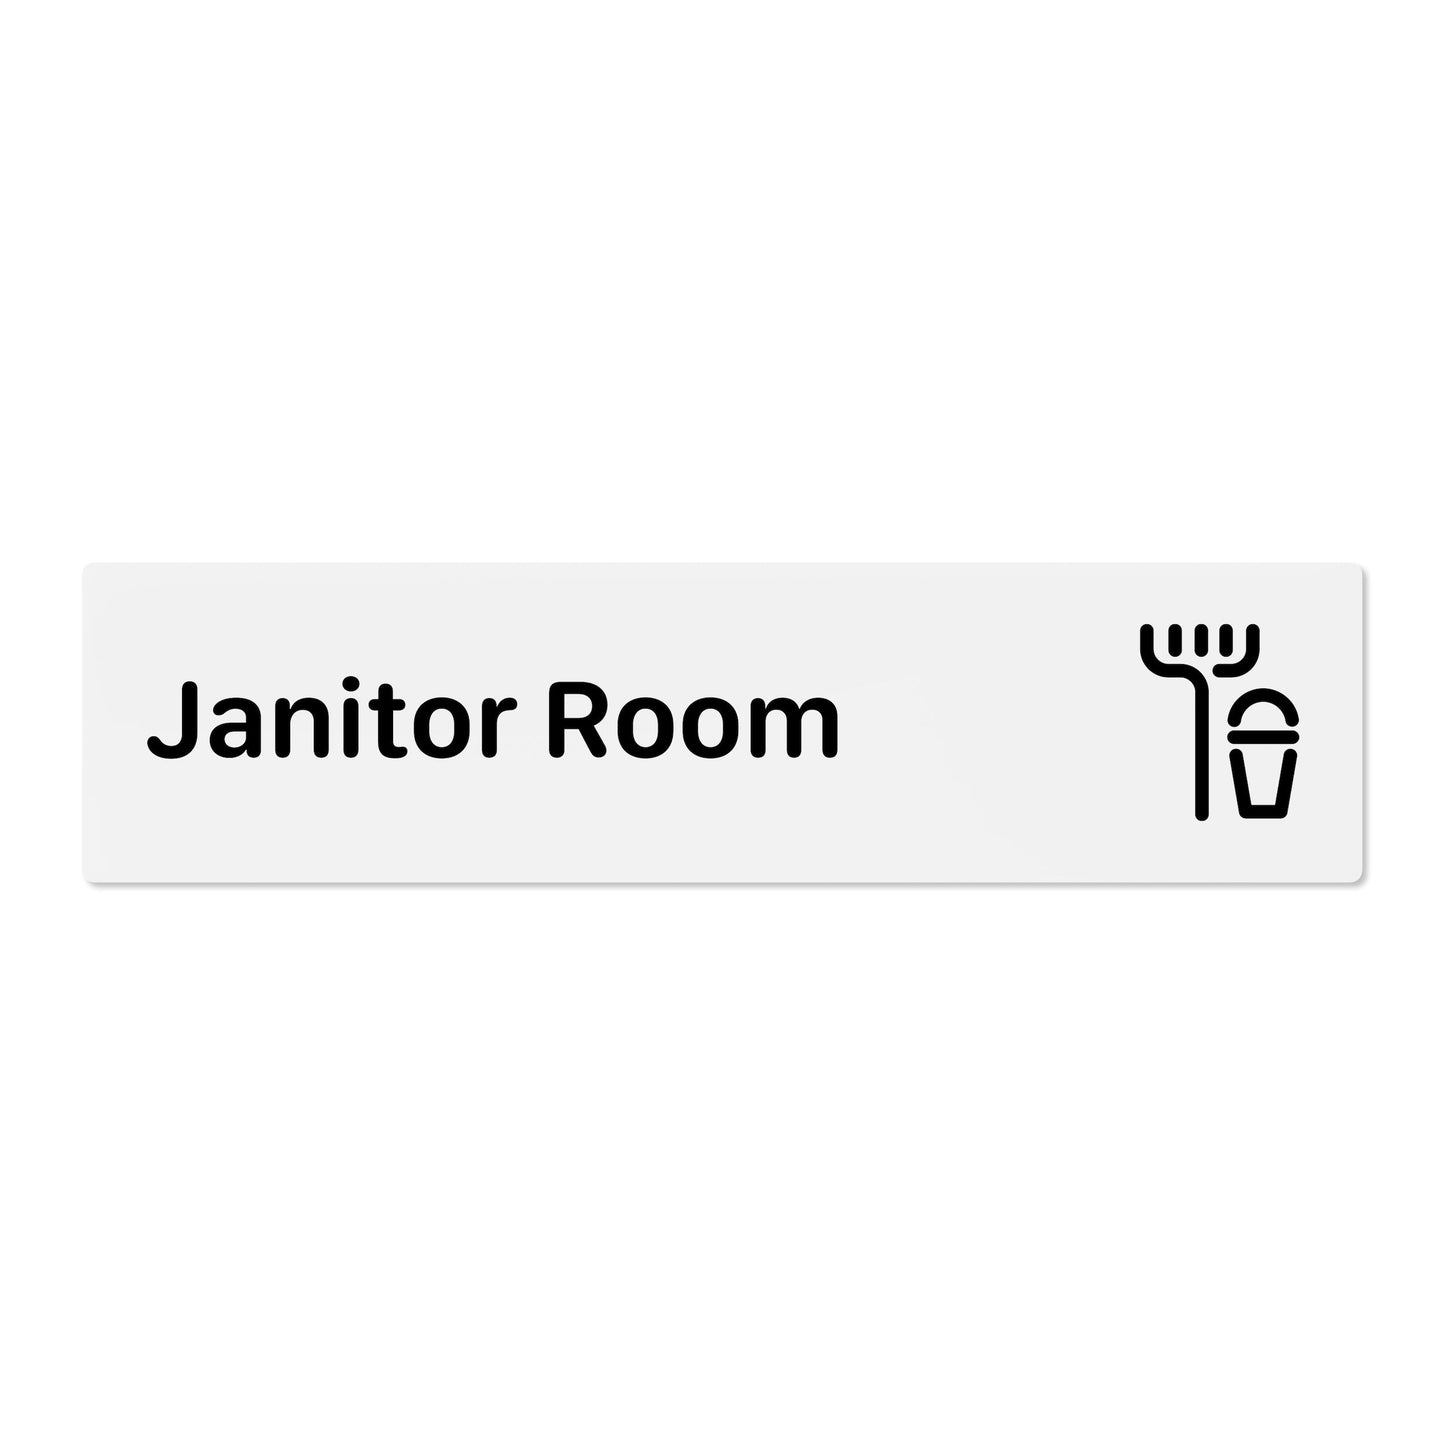 Janitor Room